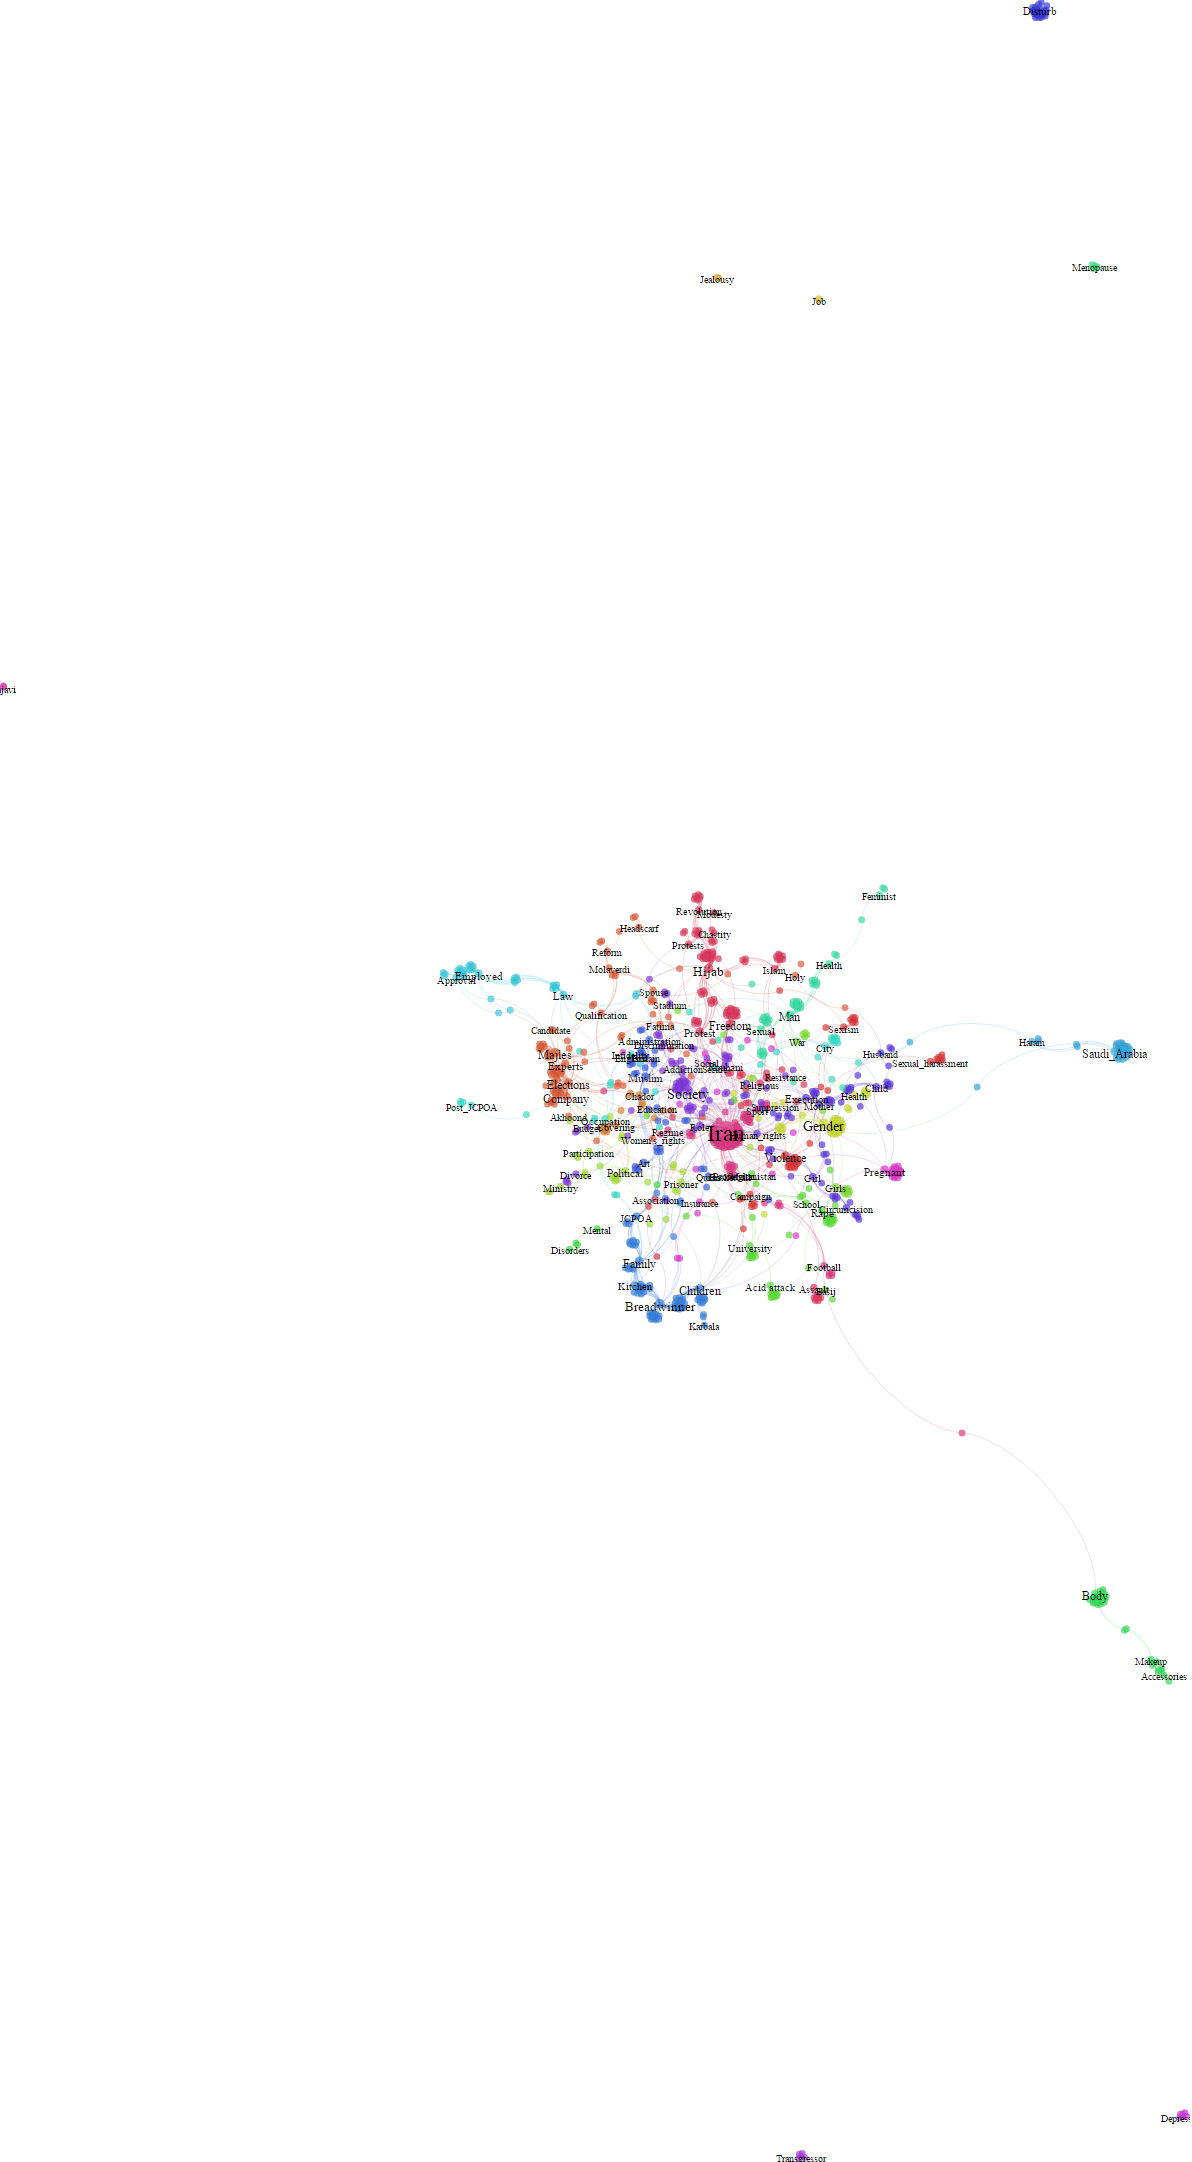 Network of tweets and words used by ordinary Iranian users